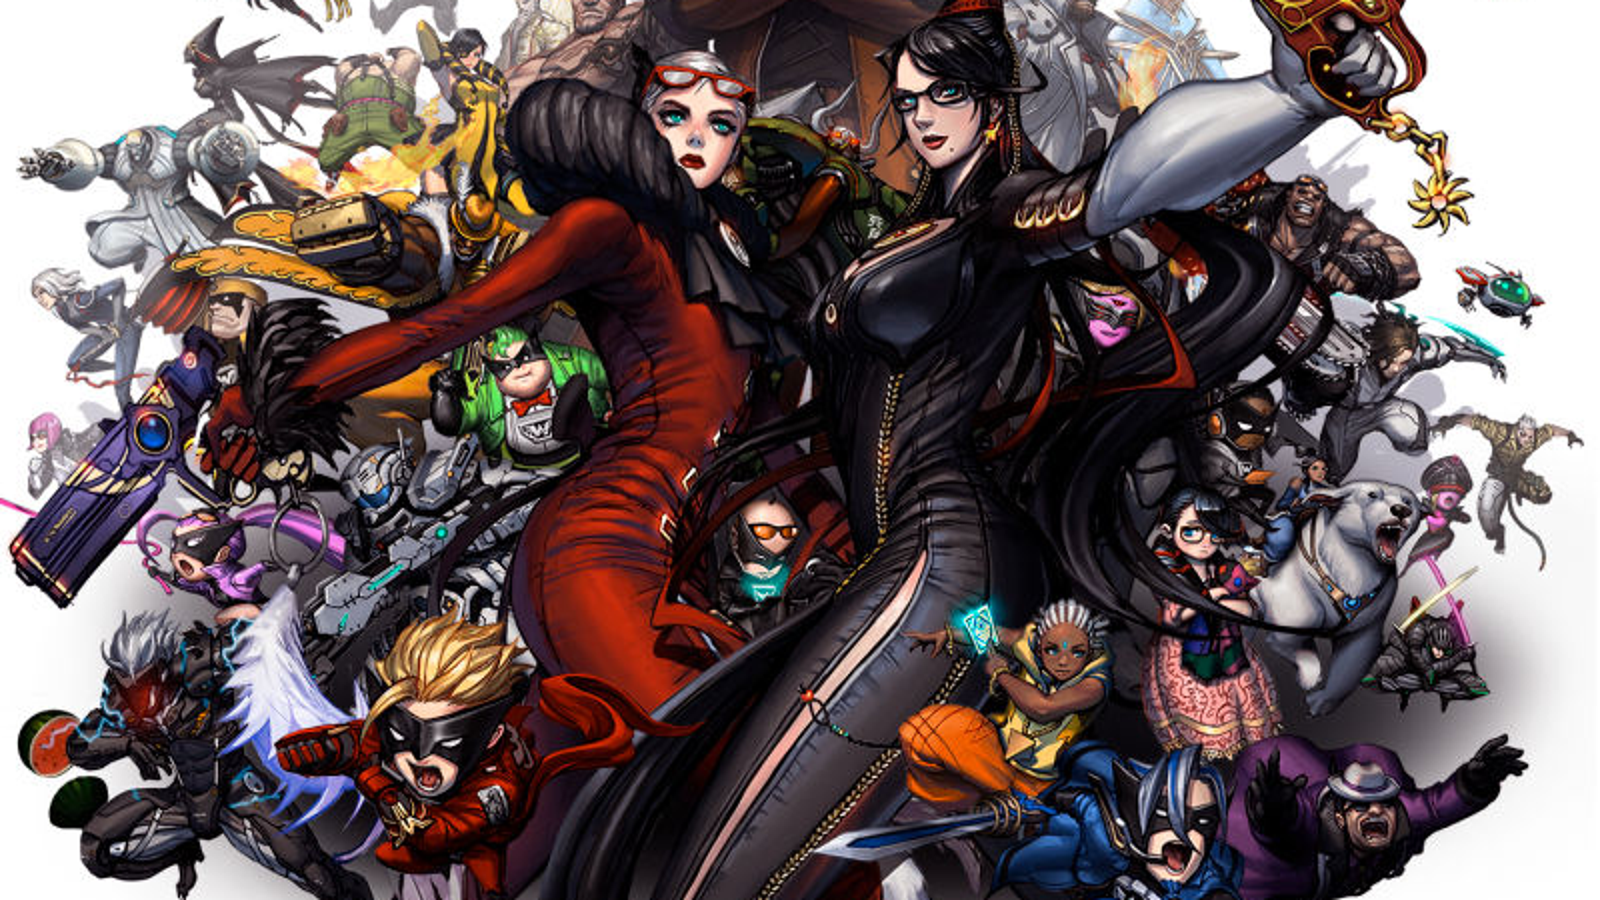 What's Next After 10 Years Of Platinum Games
